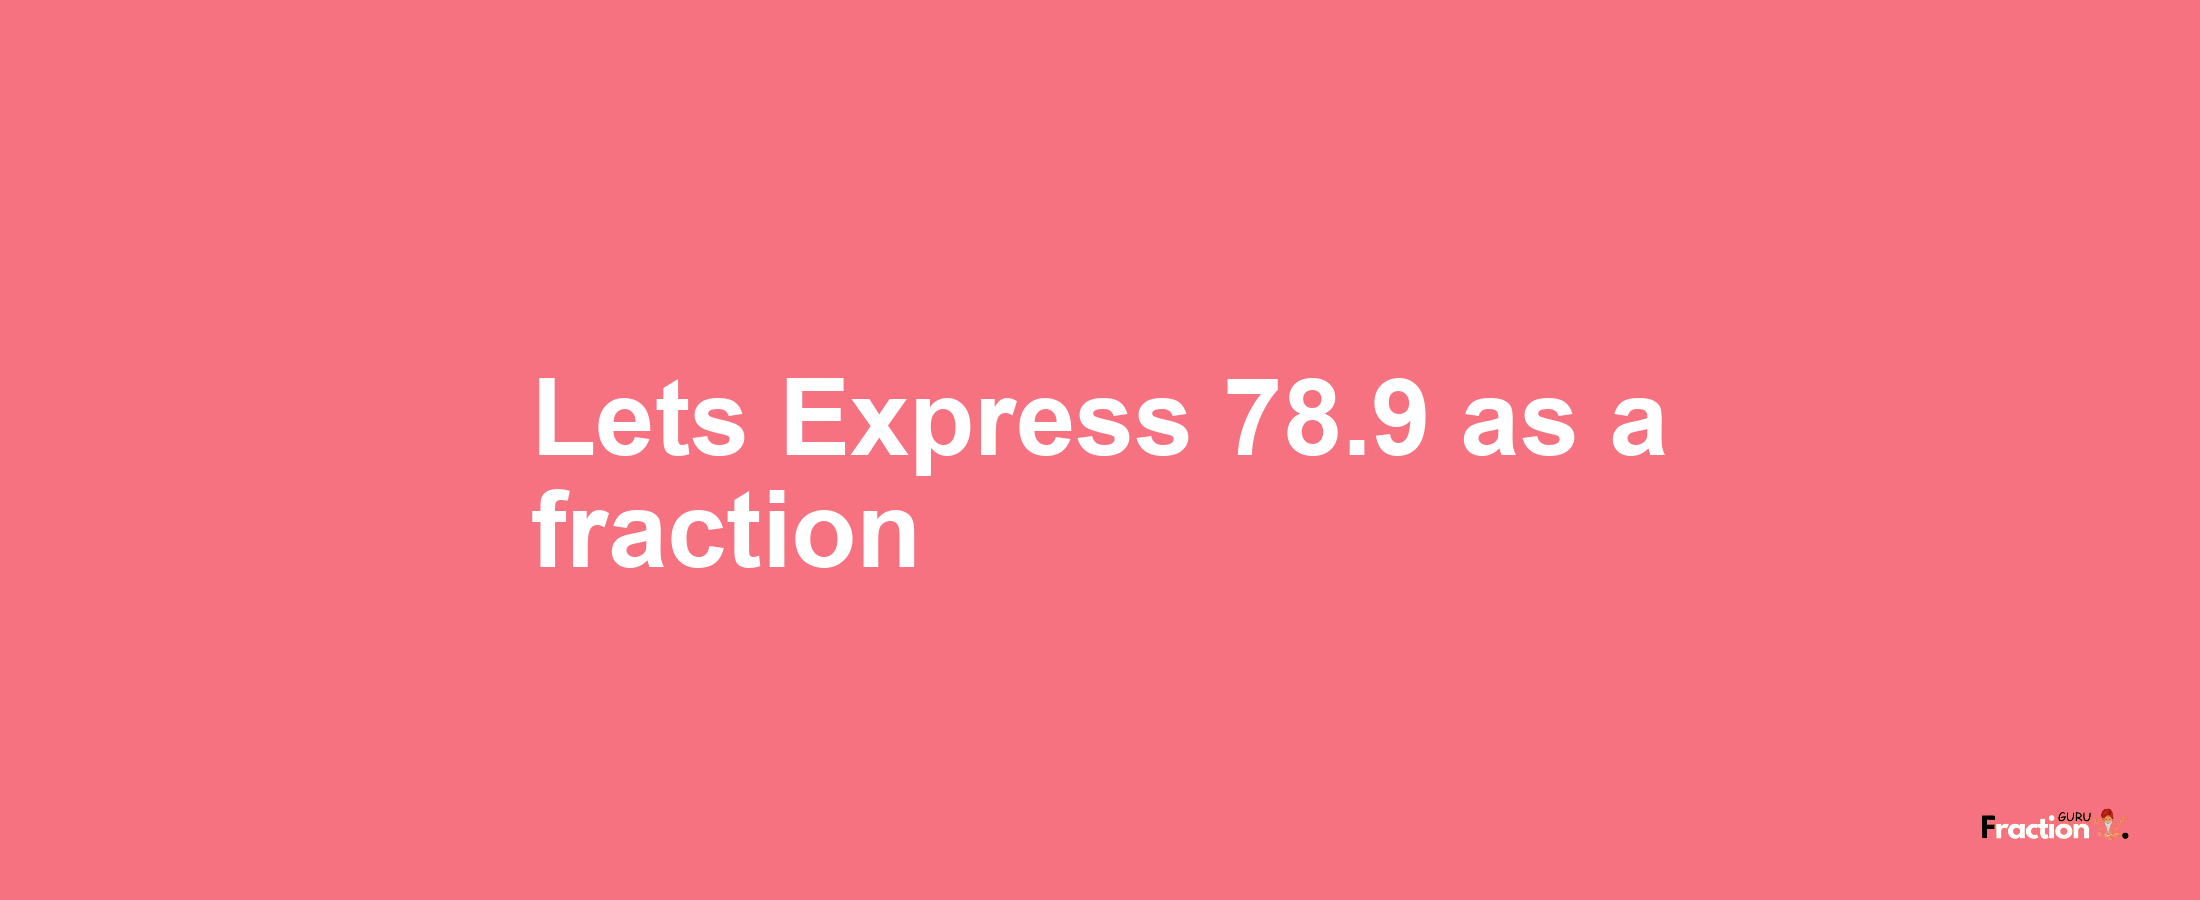 Lets Express 78.9 as afraction